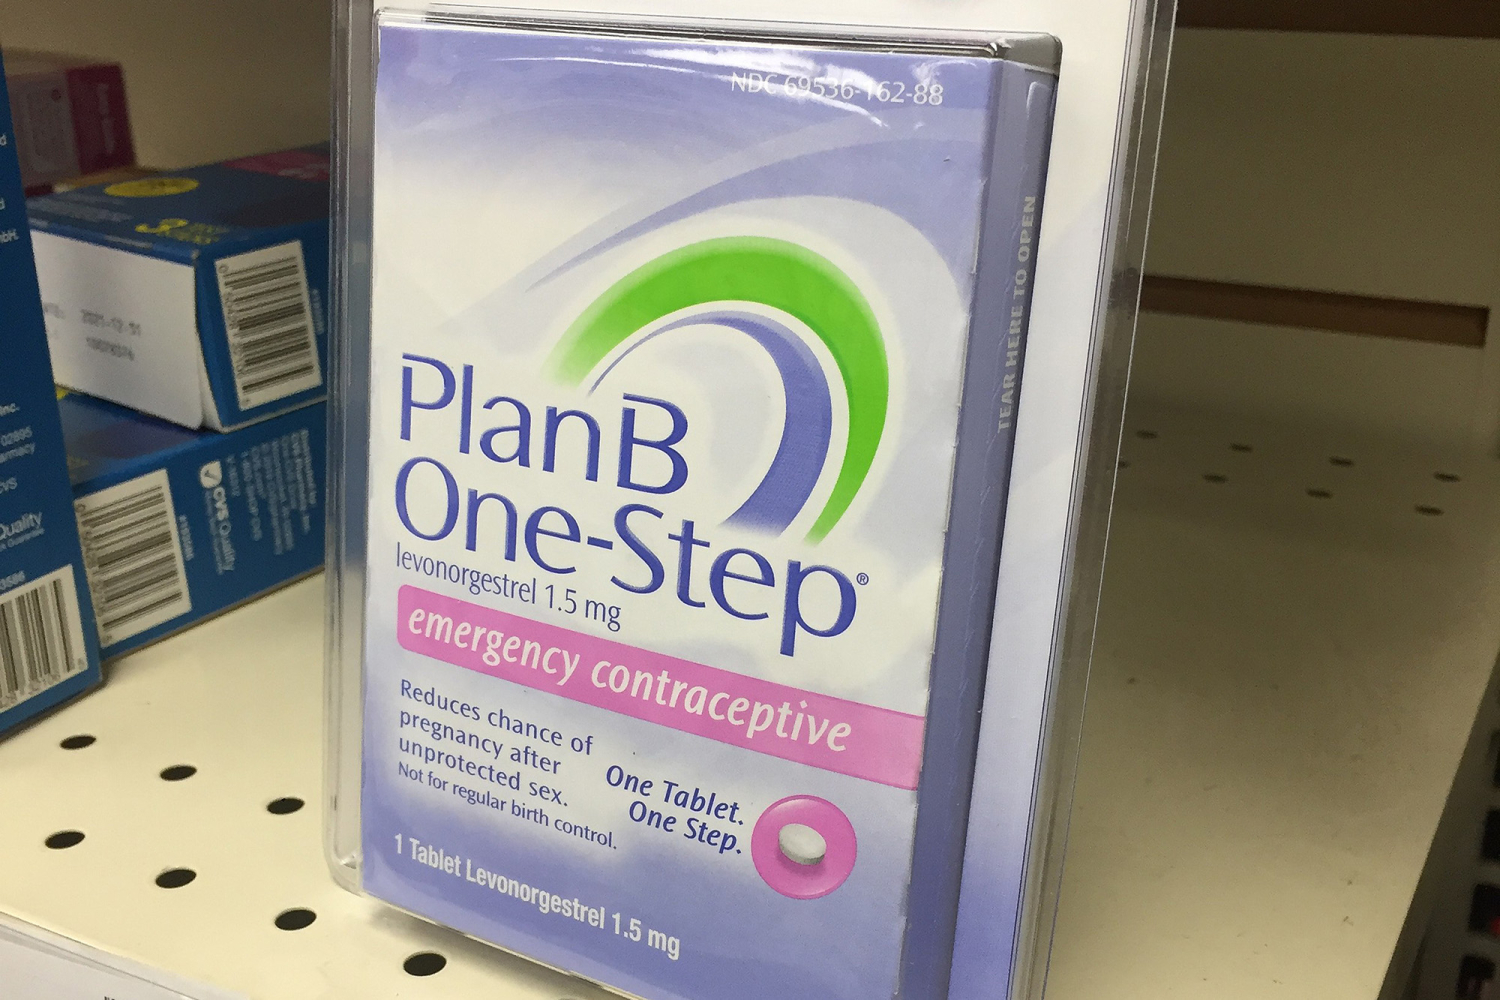 Will Indiana's abortion law affect emergency contraception like Plan B?